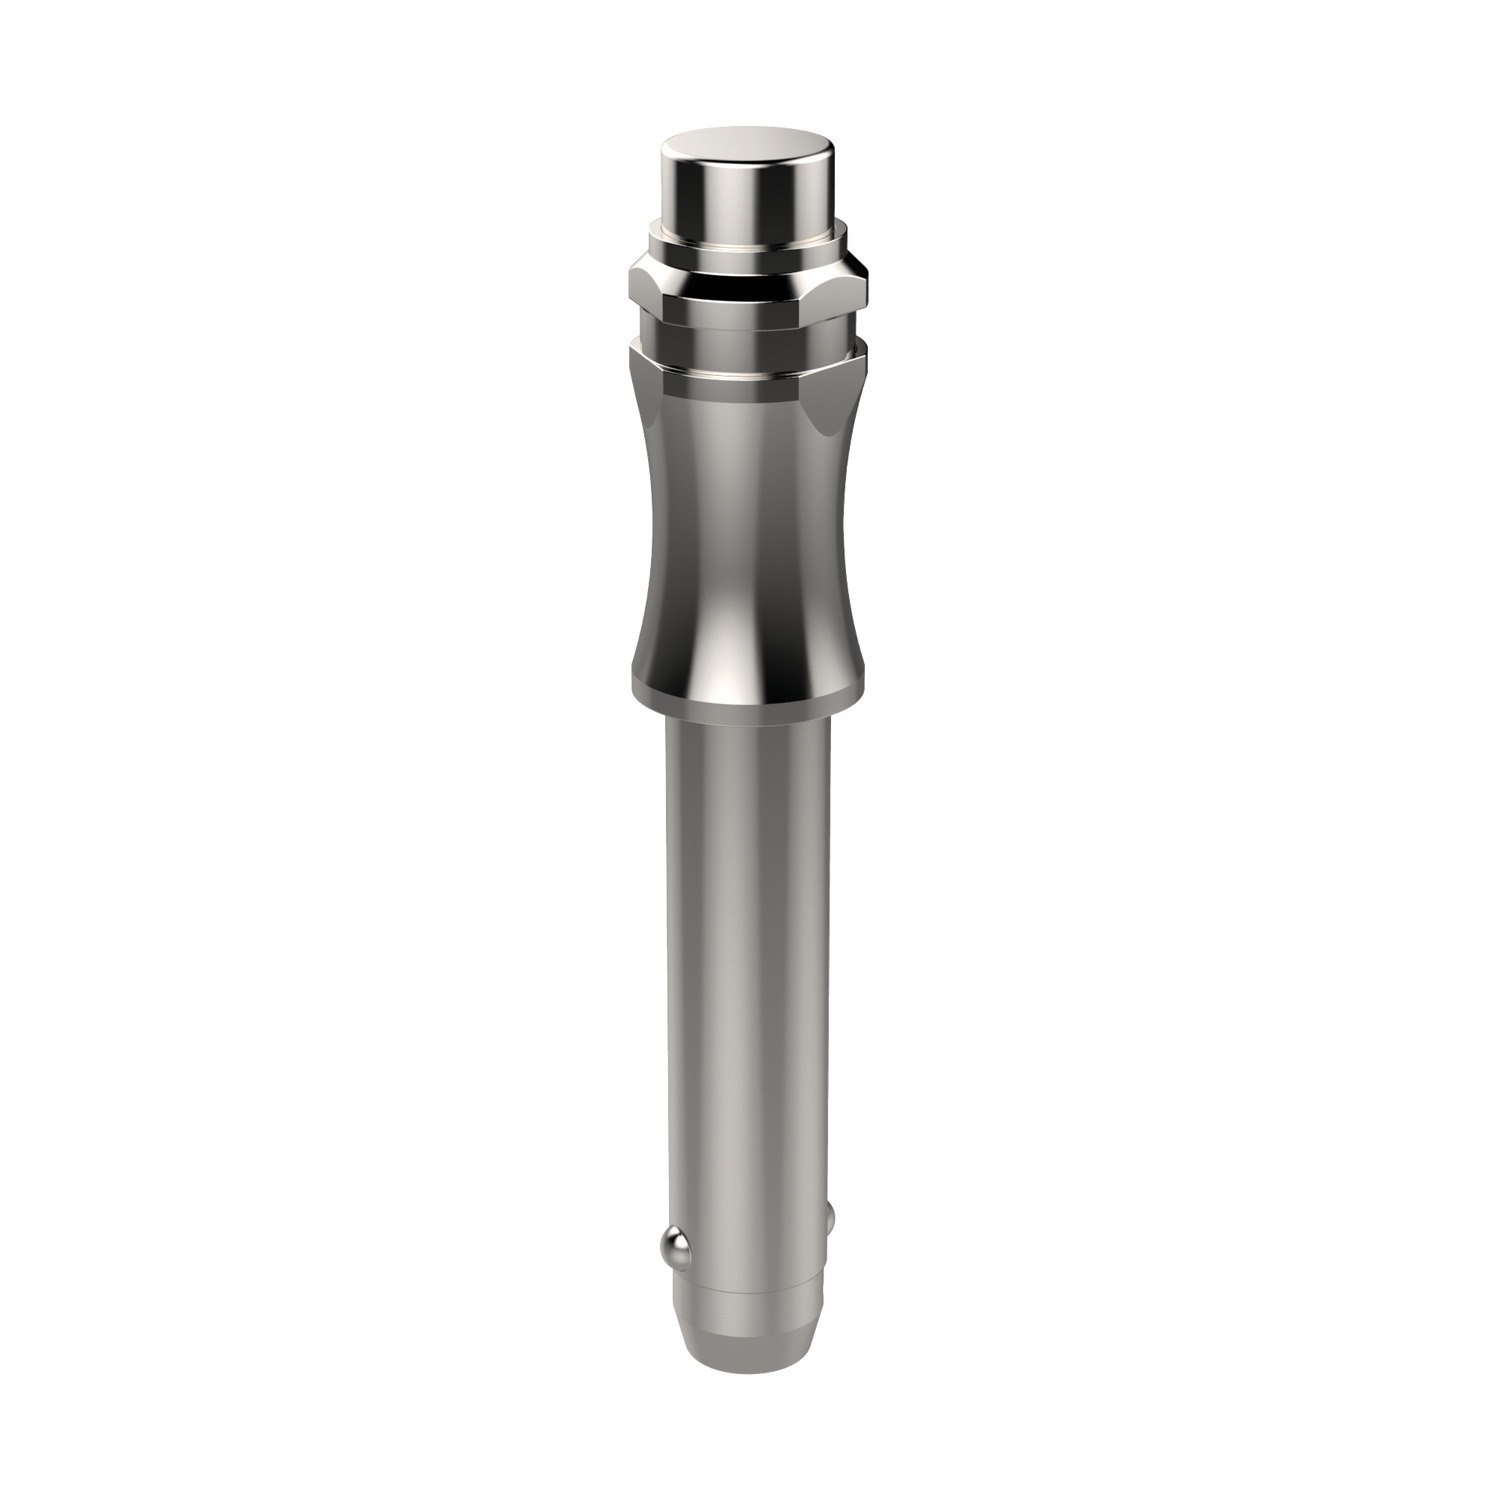 Ball Lock Pins - Contoured Handle Single piece ball lock pin, shown here in grade 5 titanium, a material with an extremely high strength-to-weight ratio and outstanding corrosion resistance. Also available in stainless steel (AISI 303 and 630; see product 33194).